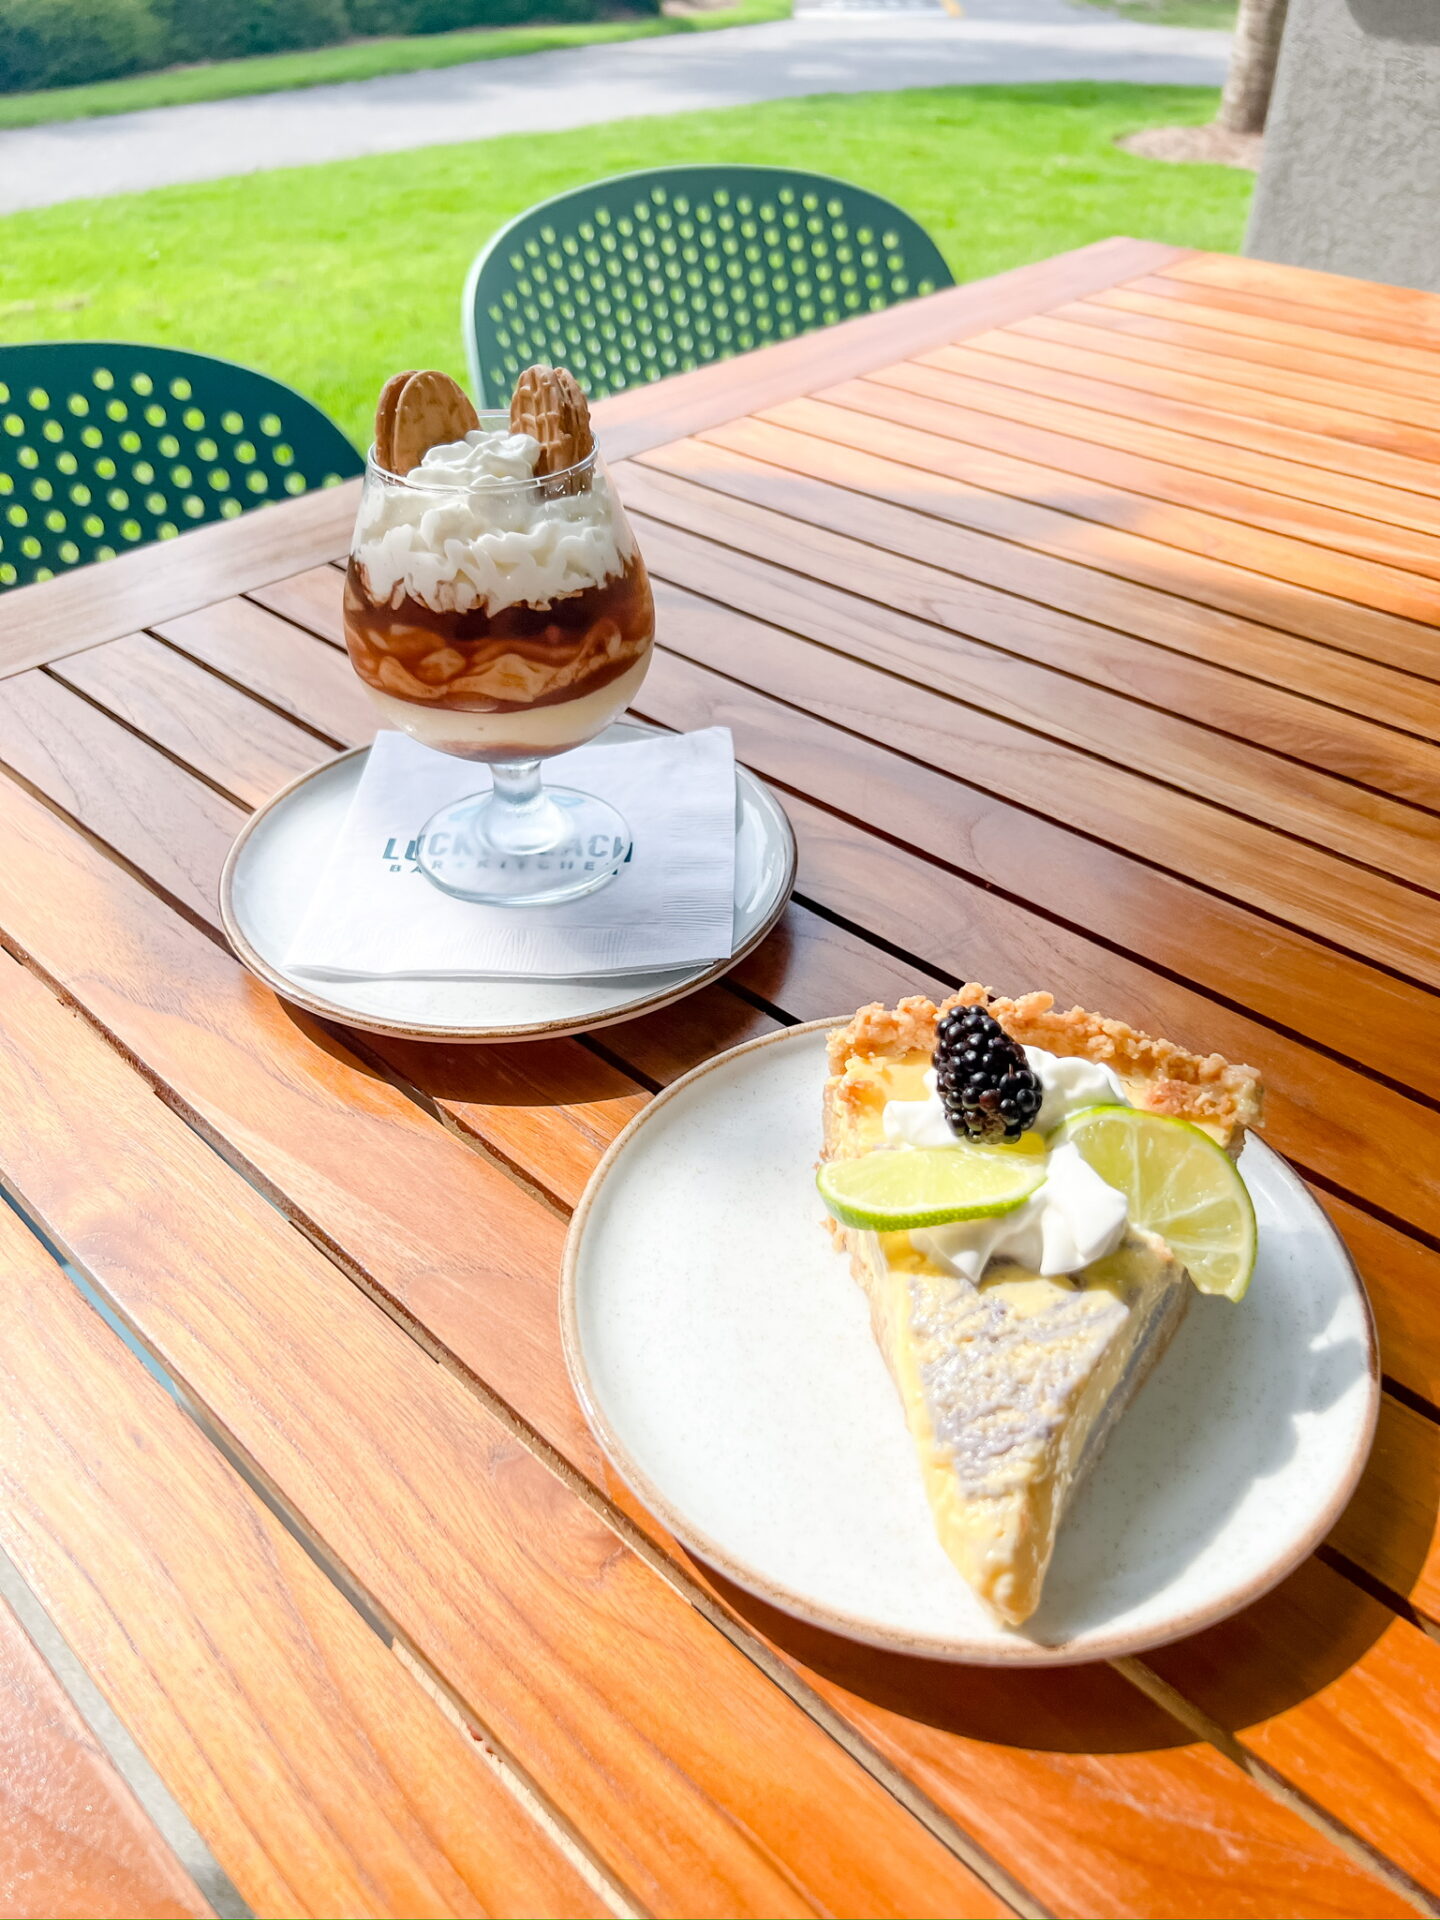 pie and a truffle on an outdoor table